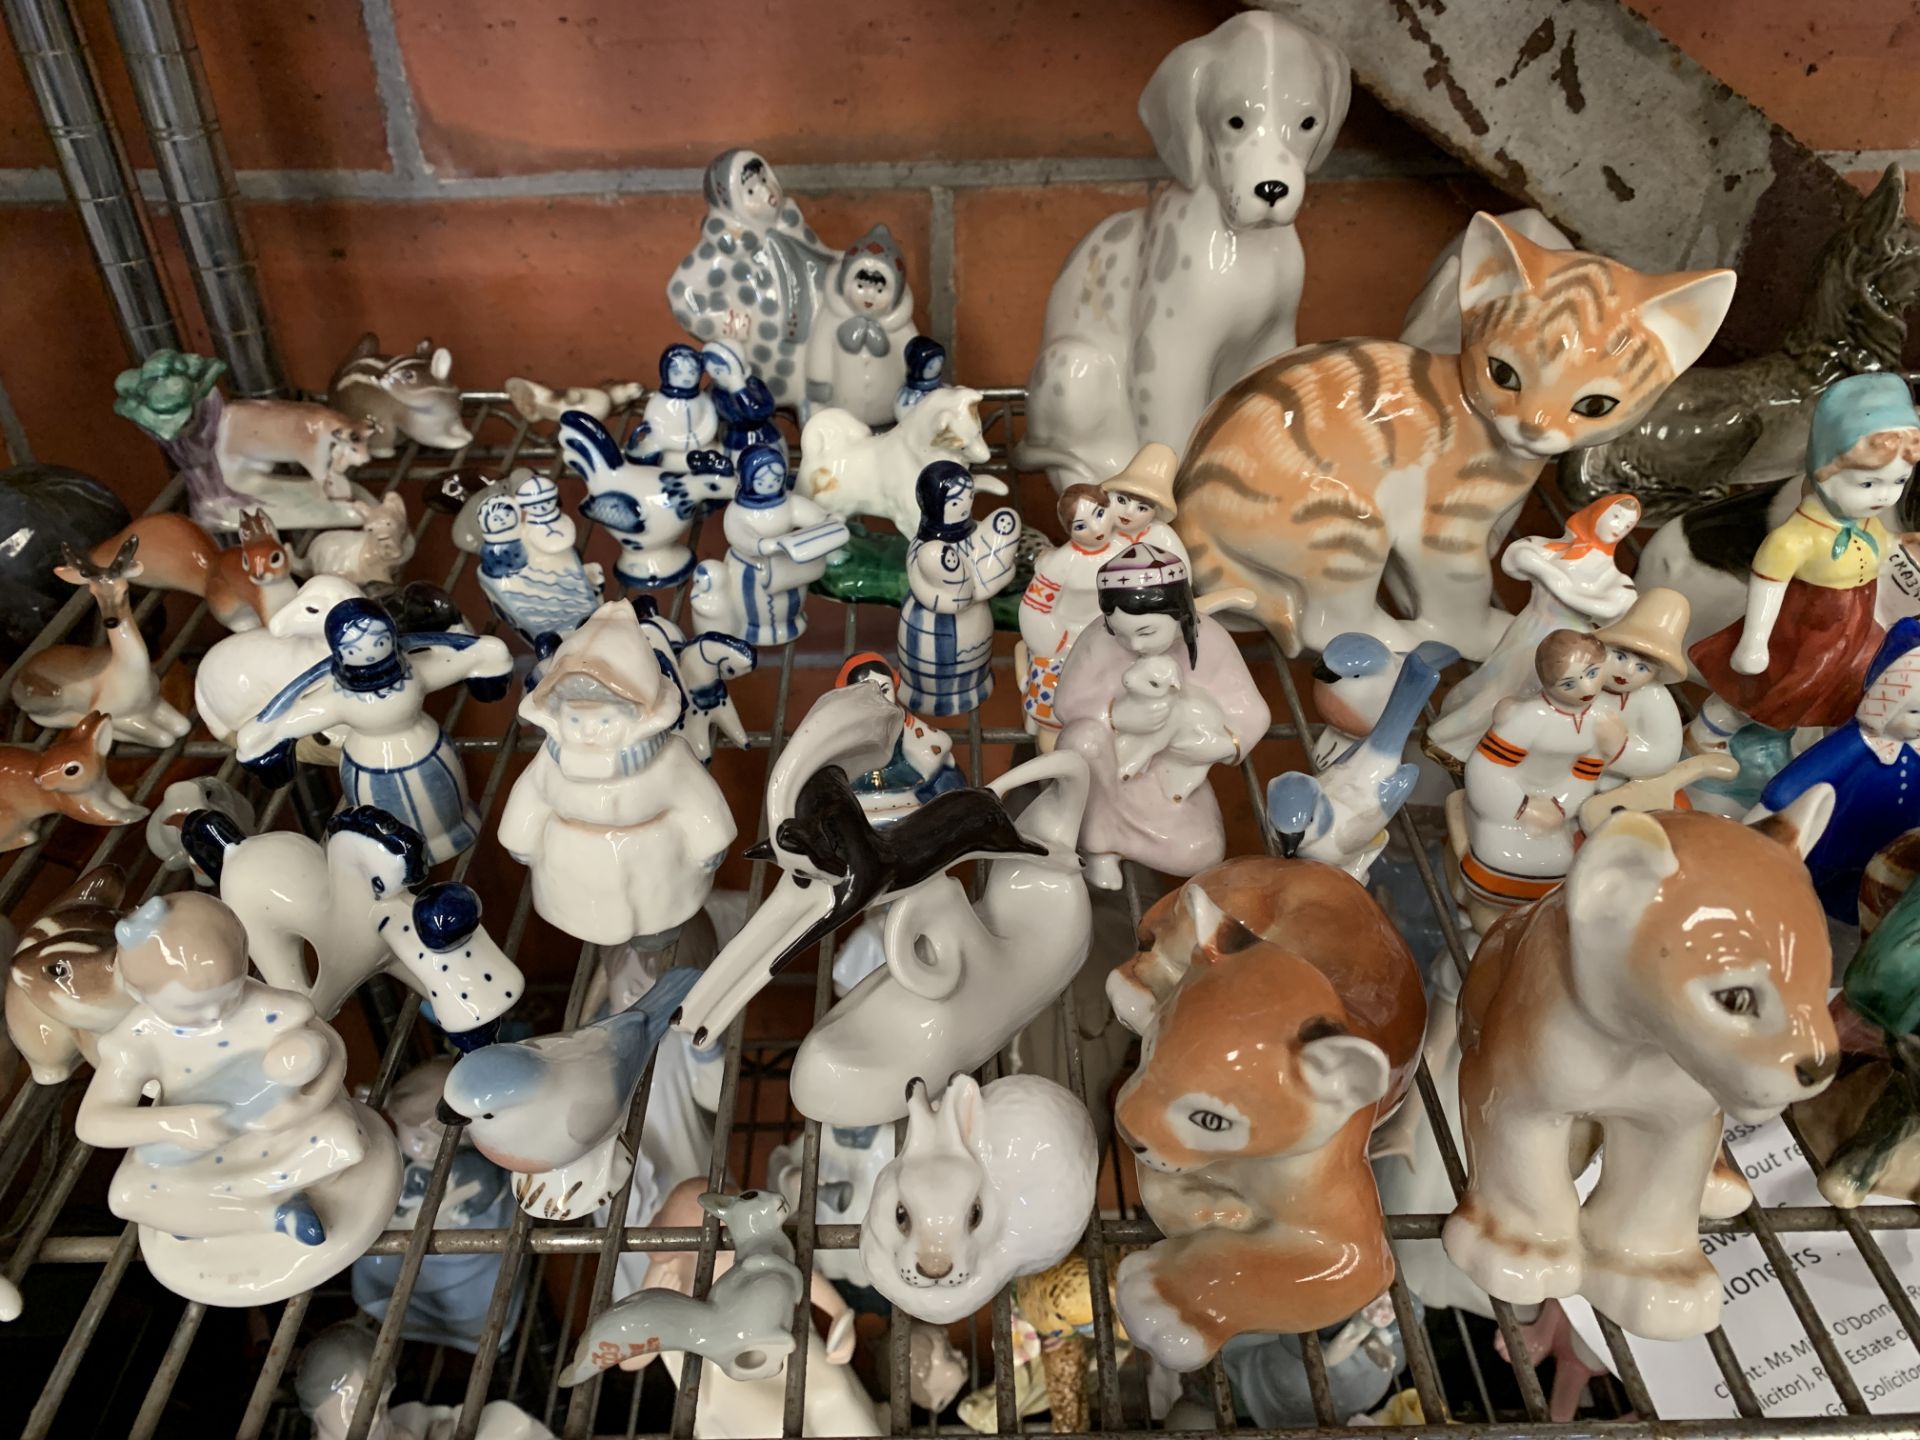 Approximately 100 Russian made ceramic figurines